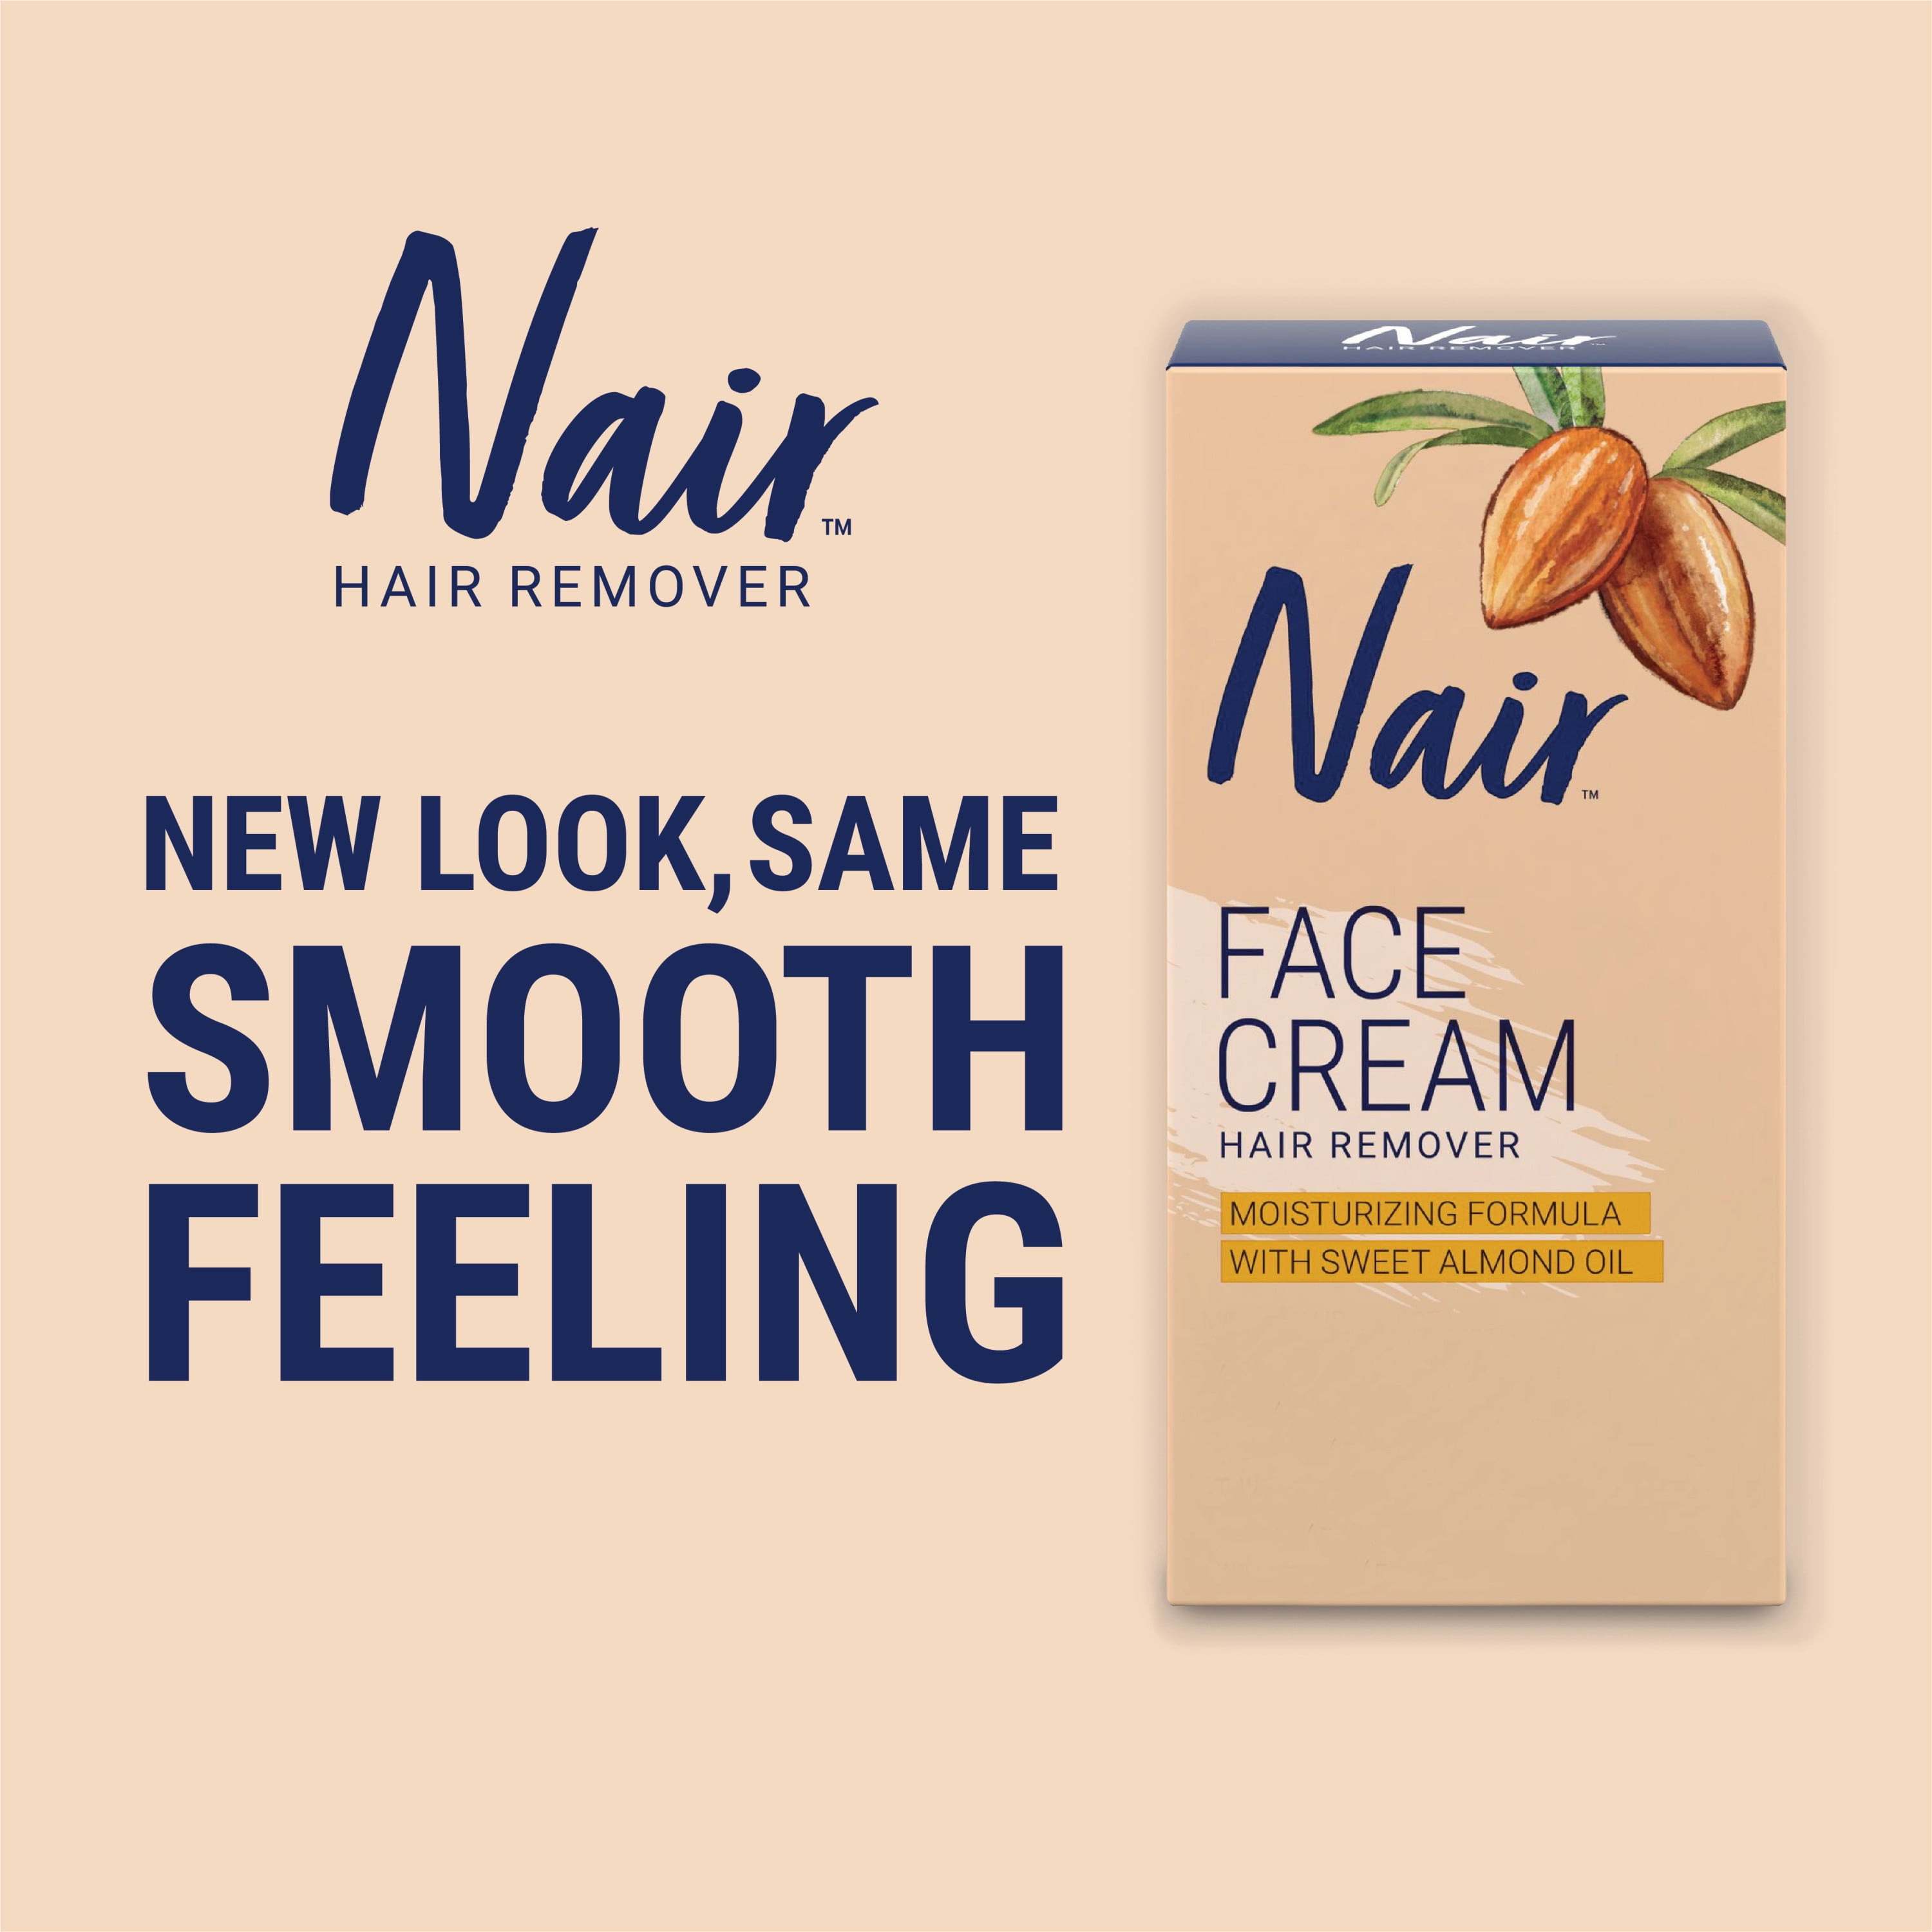 Nair Moisturizing Facial Hair Removal Cream With Sweet Almond Oil, #1 Depilatory Cream For Face, 2 oz Bottle, For All Skin Types